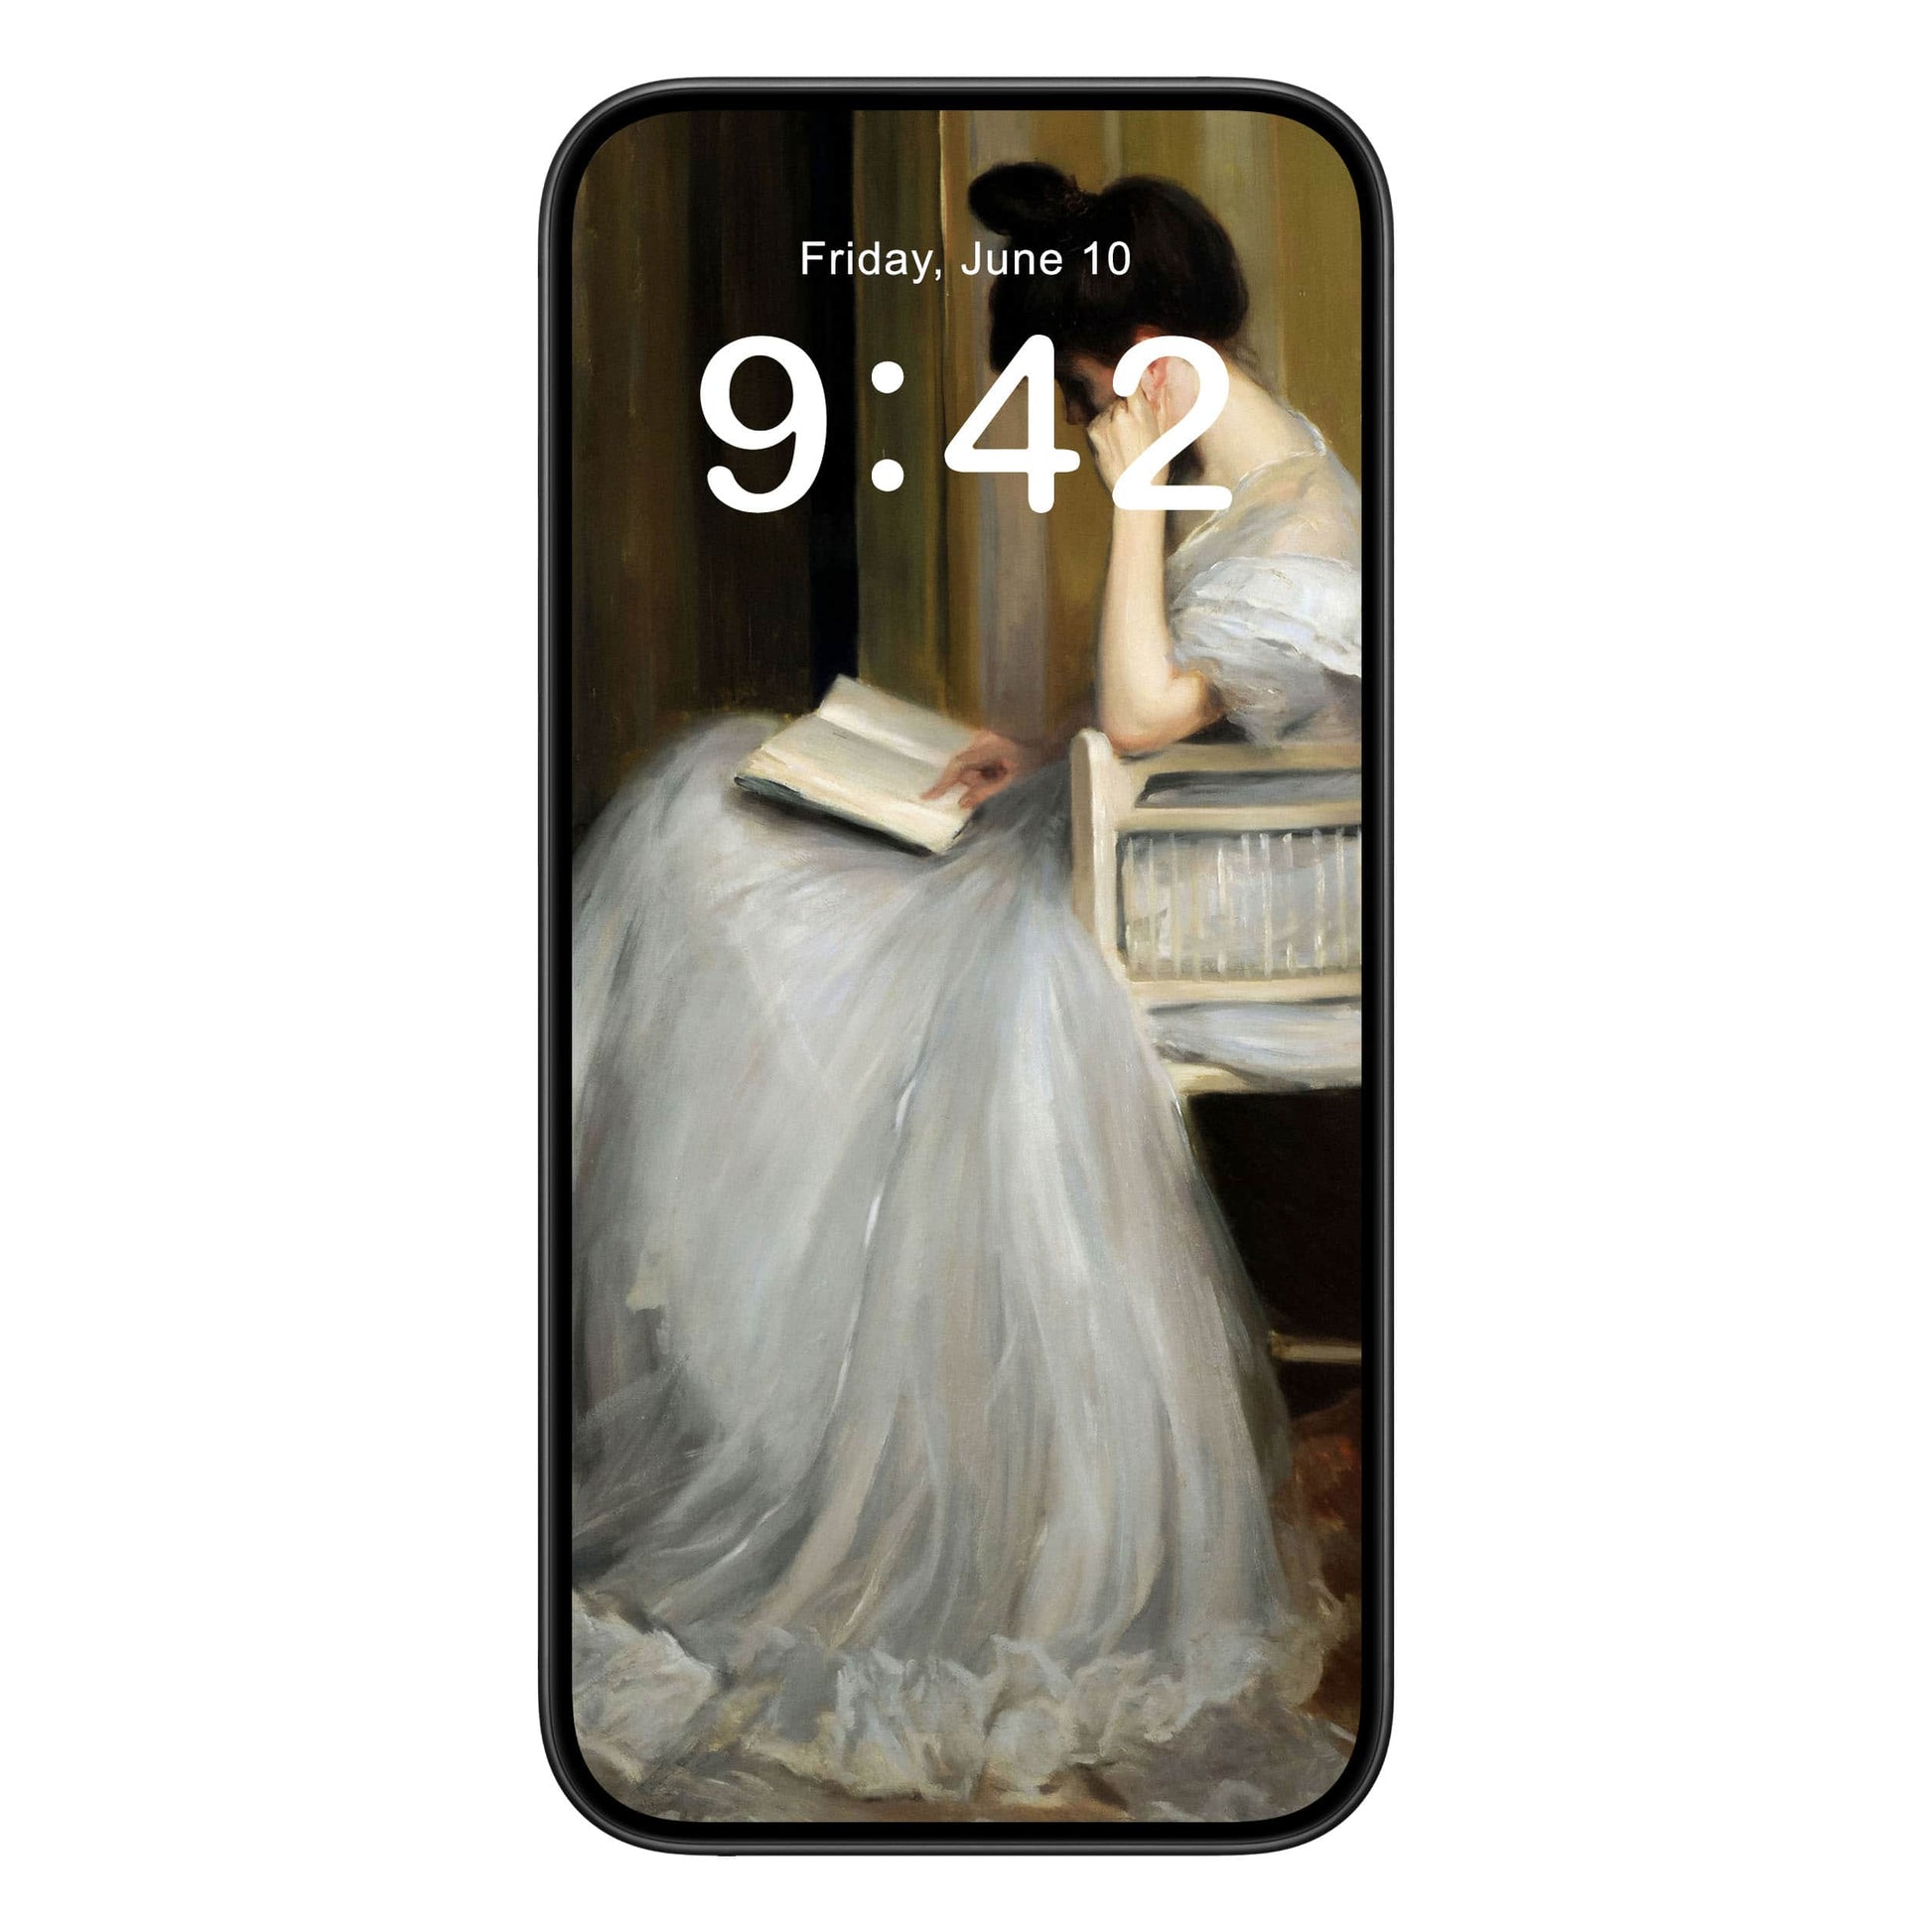 Woman Reading phone wallpaper background with vintage oil painting design shown on a phone lock screen, instant download available.